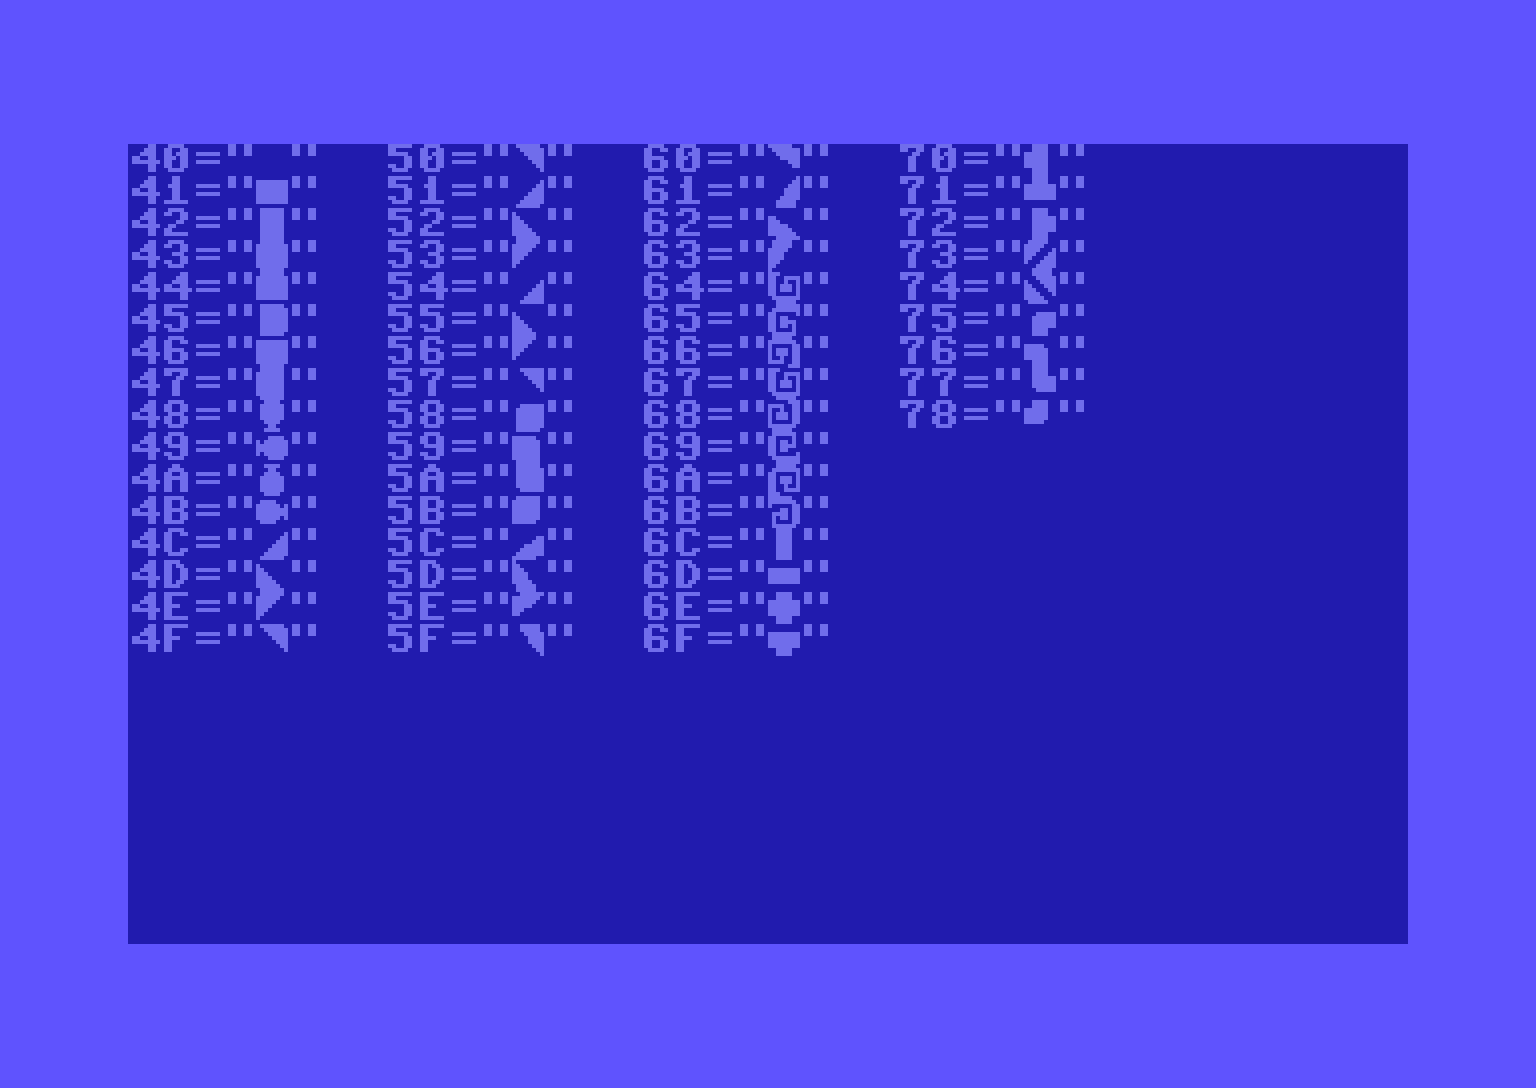 Fake C64 screen with hexadecimal screen codes and their changed graphical representation